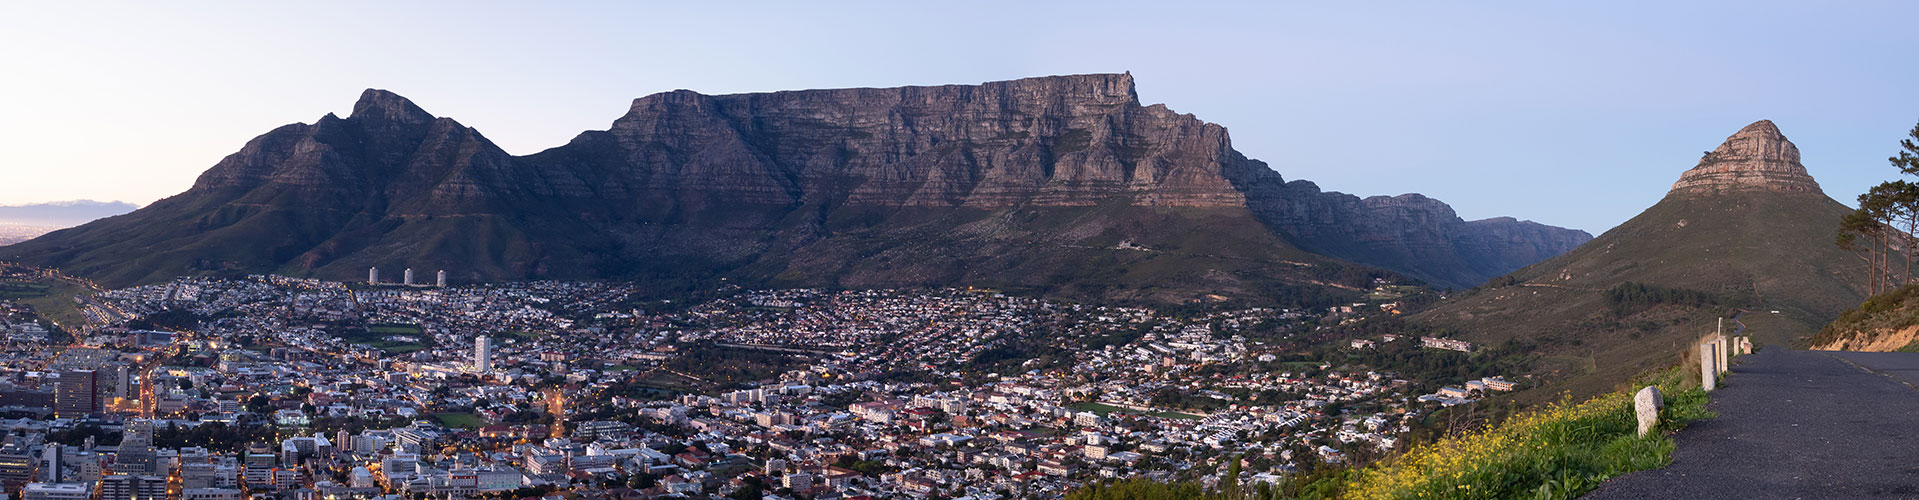 A view of Cape Town, Table Mountain, the Twelve Apostles and Lion's Head from Signal Hill in South Africa.